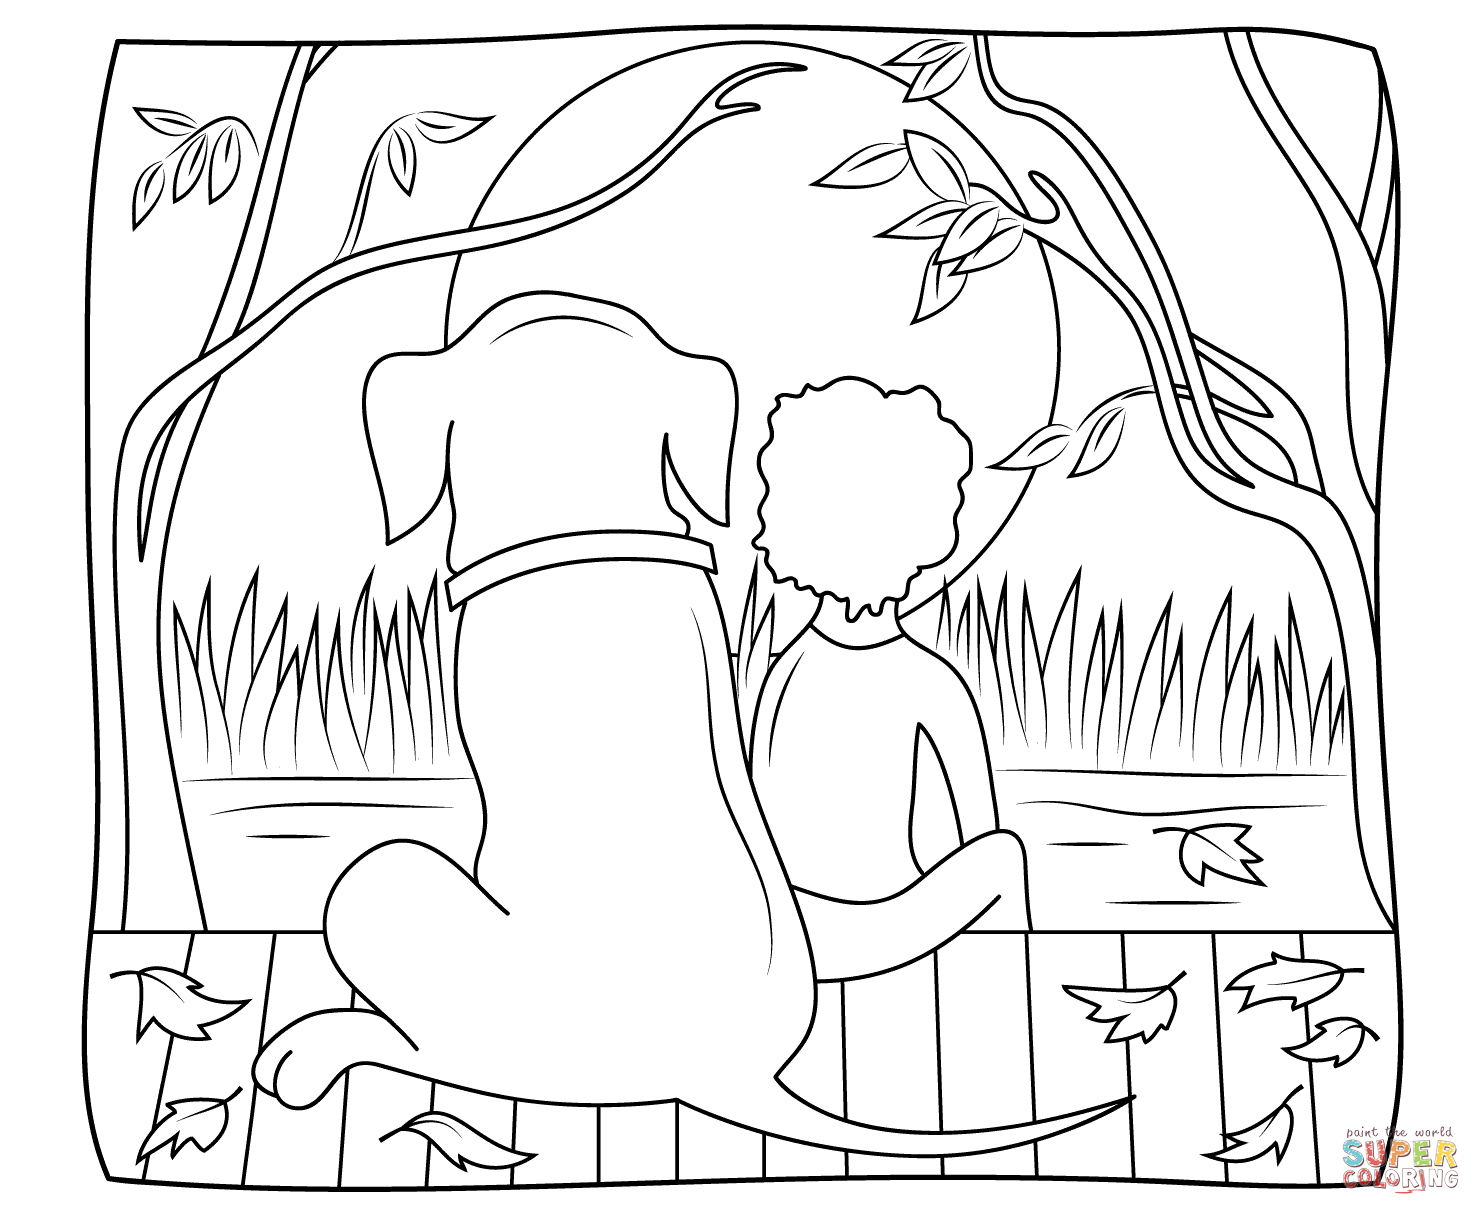 Henry and mudge under ther yellow moon coloring page free printable coloring pages